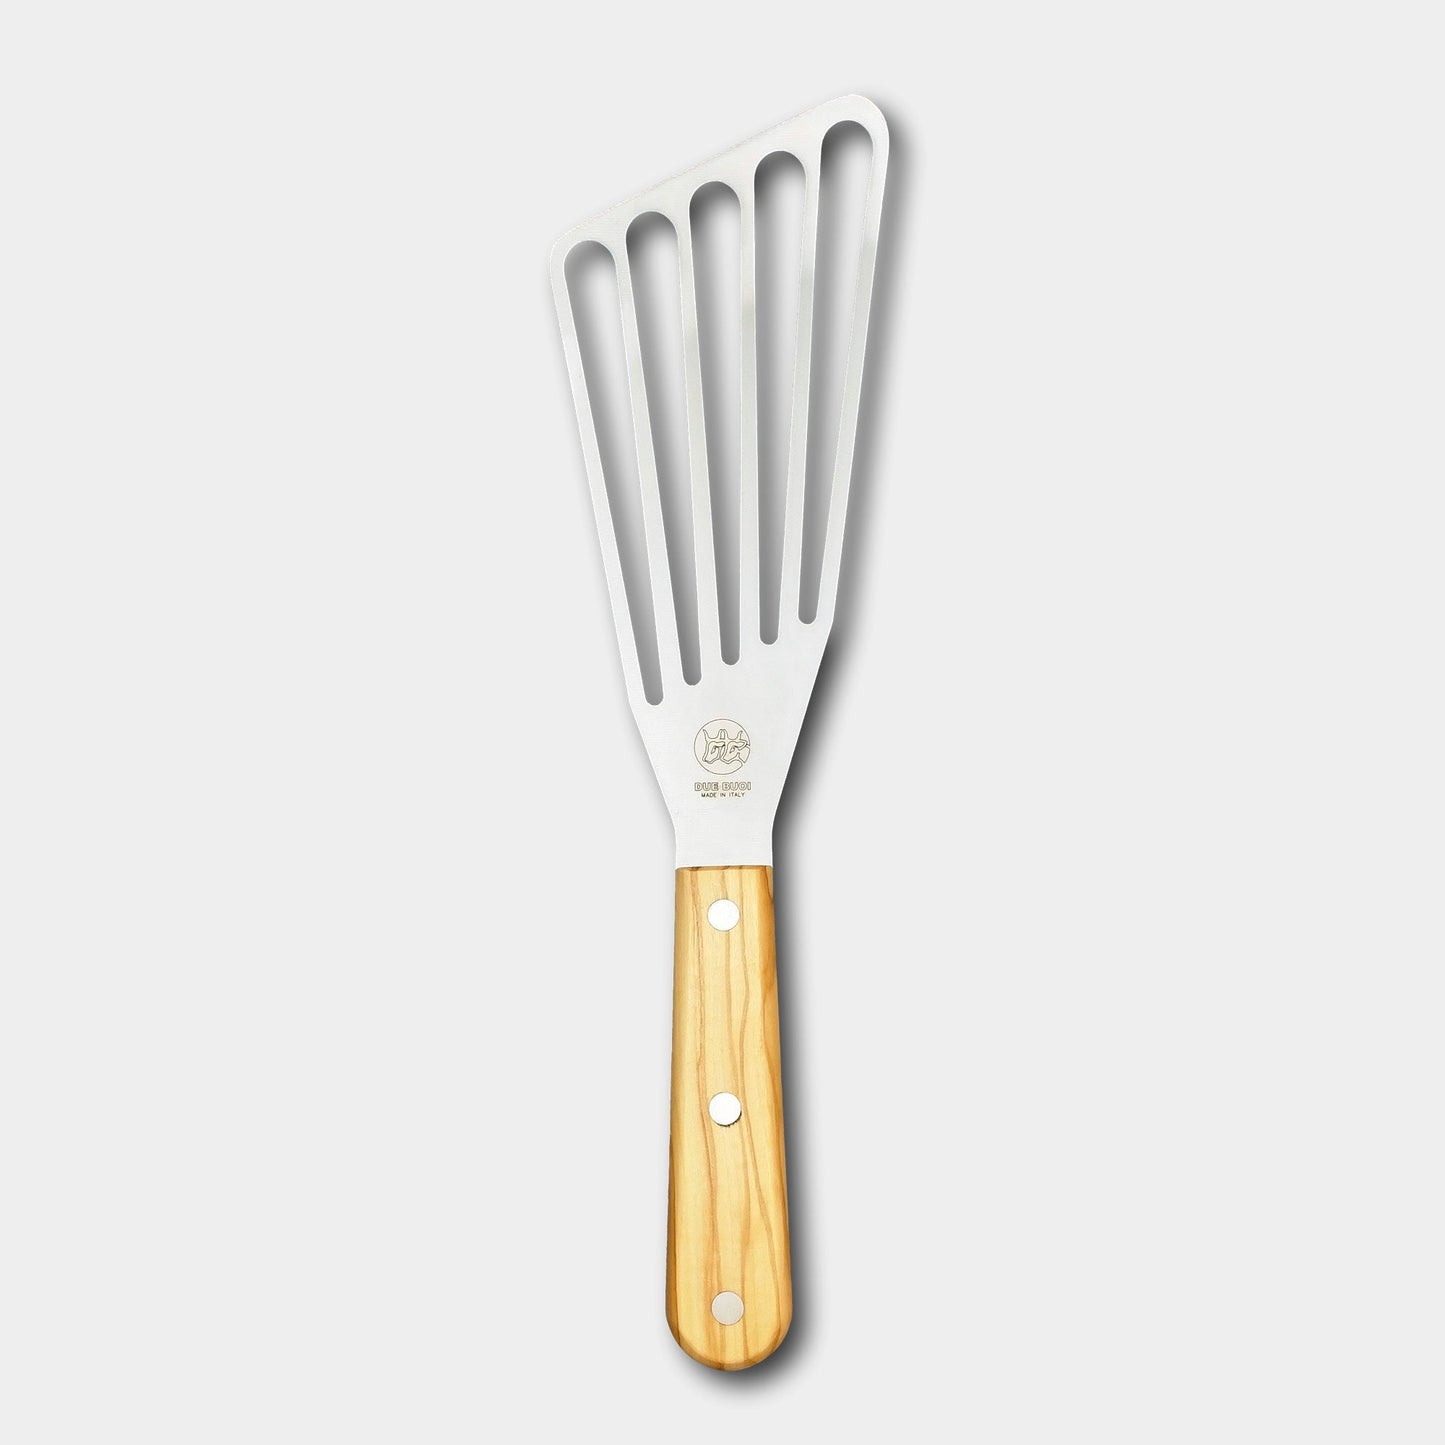 Stainless Steel Fish Spatula, Wooden Handle Fish Spatula, Slotted T